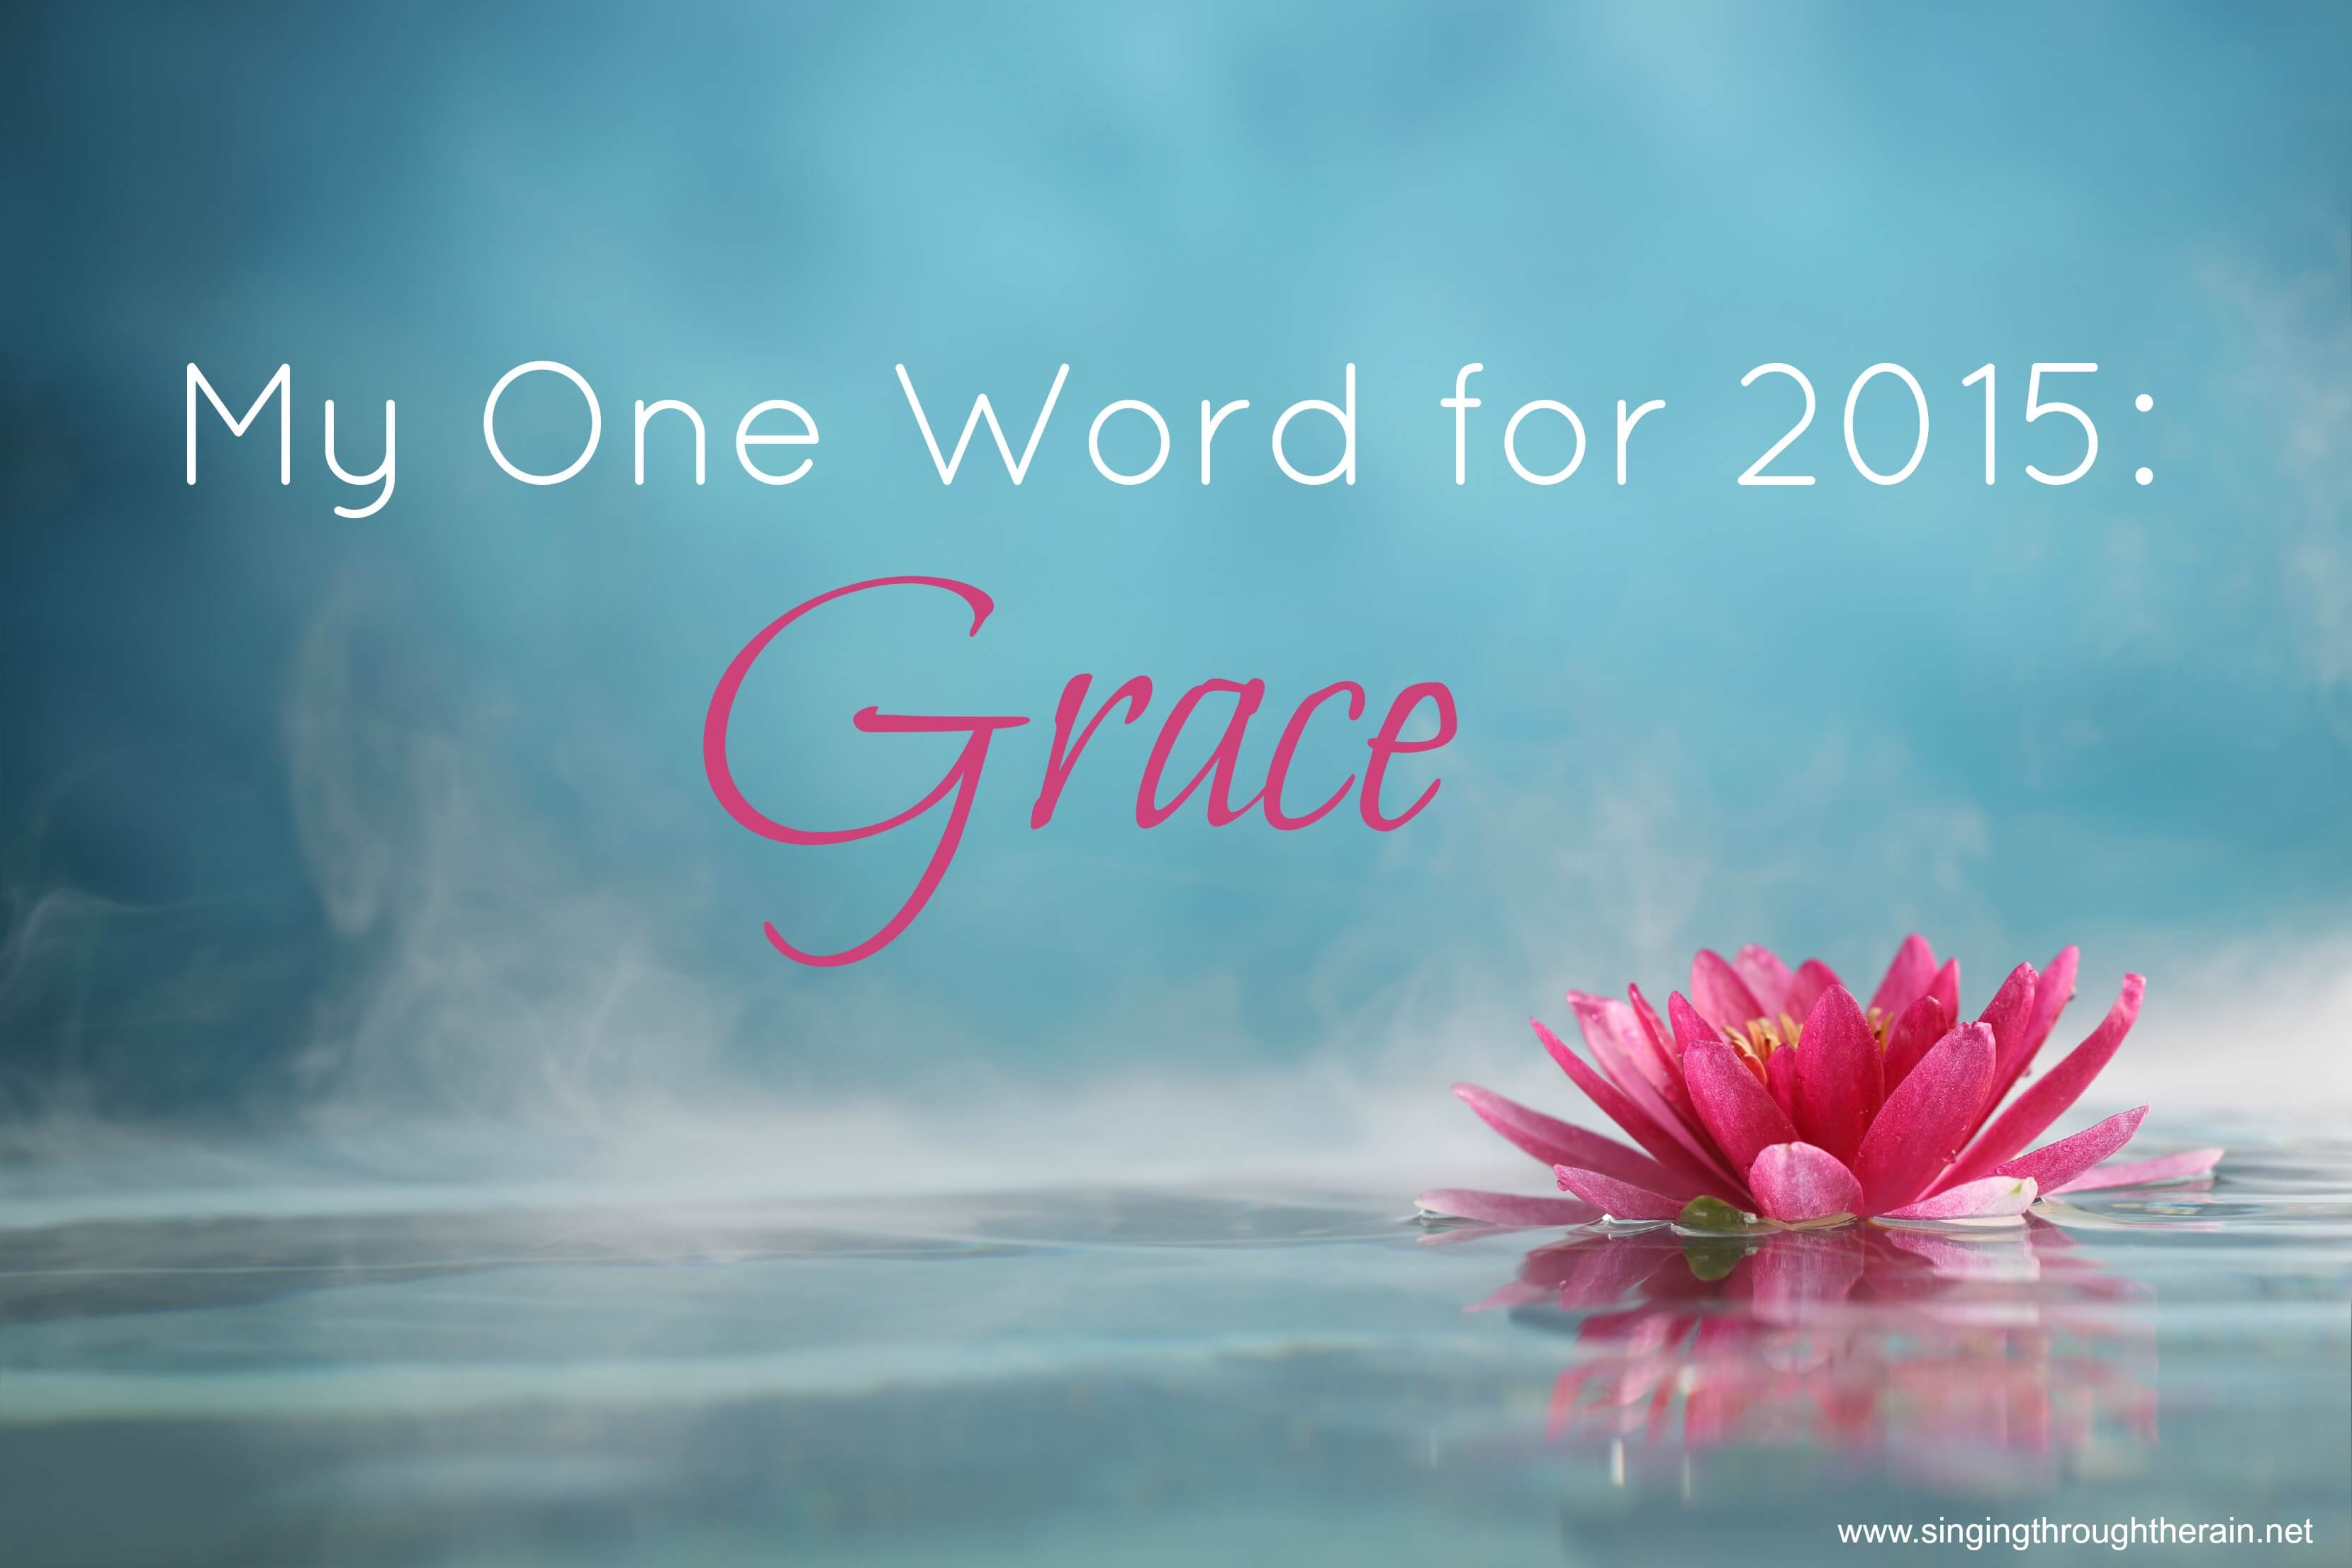 My One Word for 2015: Grace